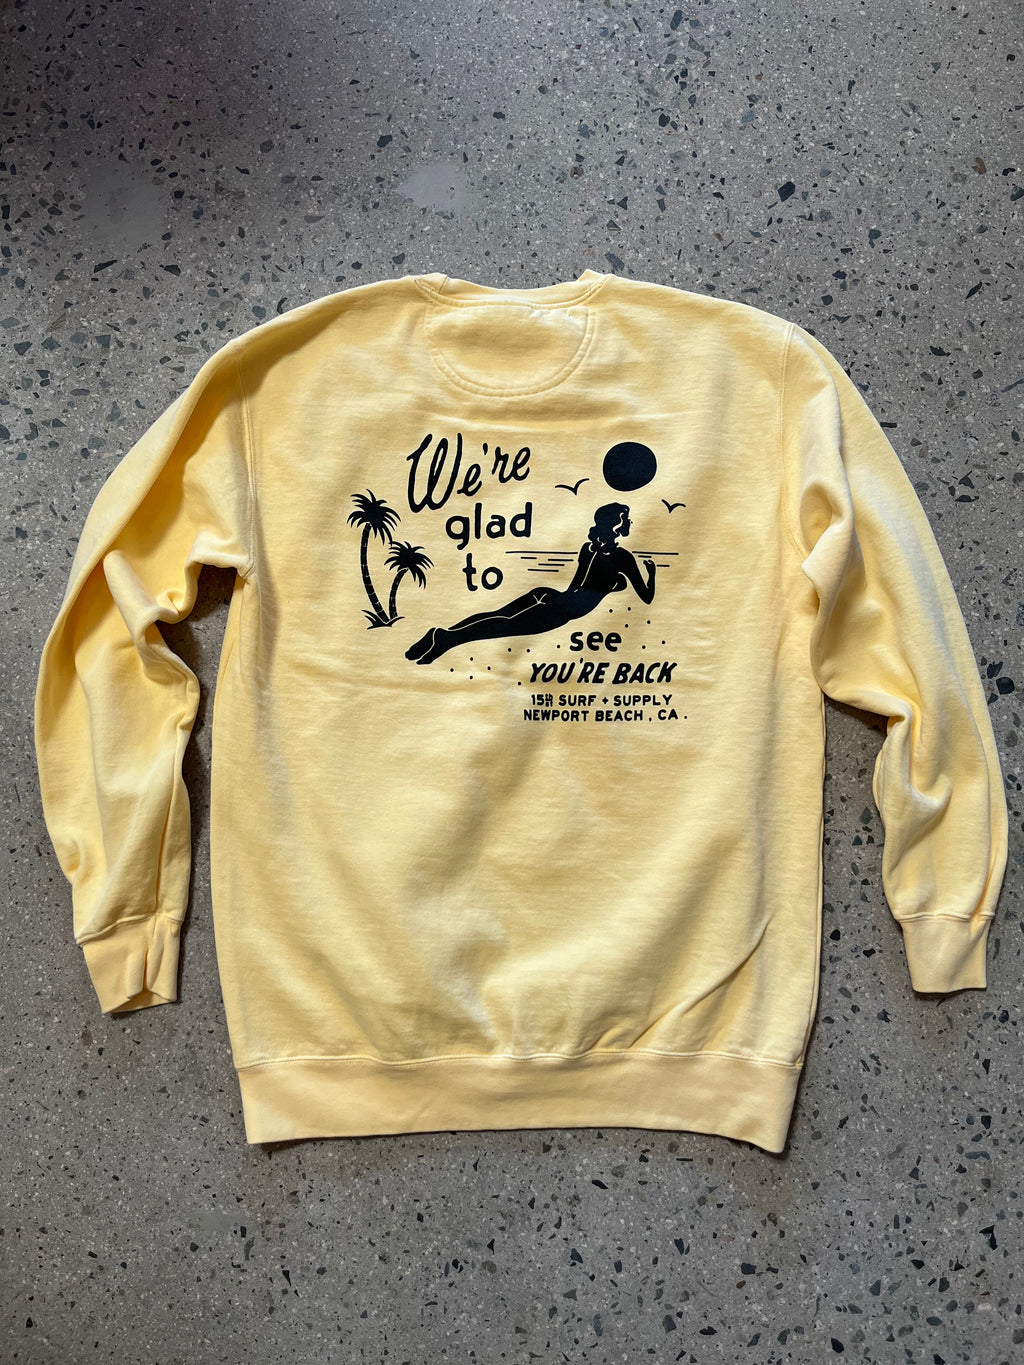 15th St Men's Glad To See You're Back Crewneck Fleece YELLOW FADE